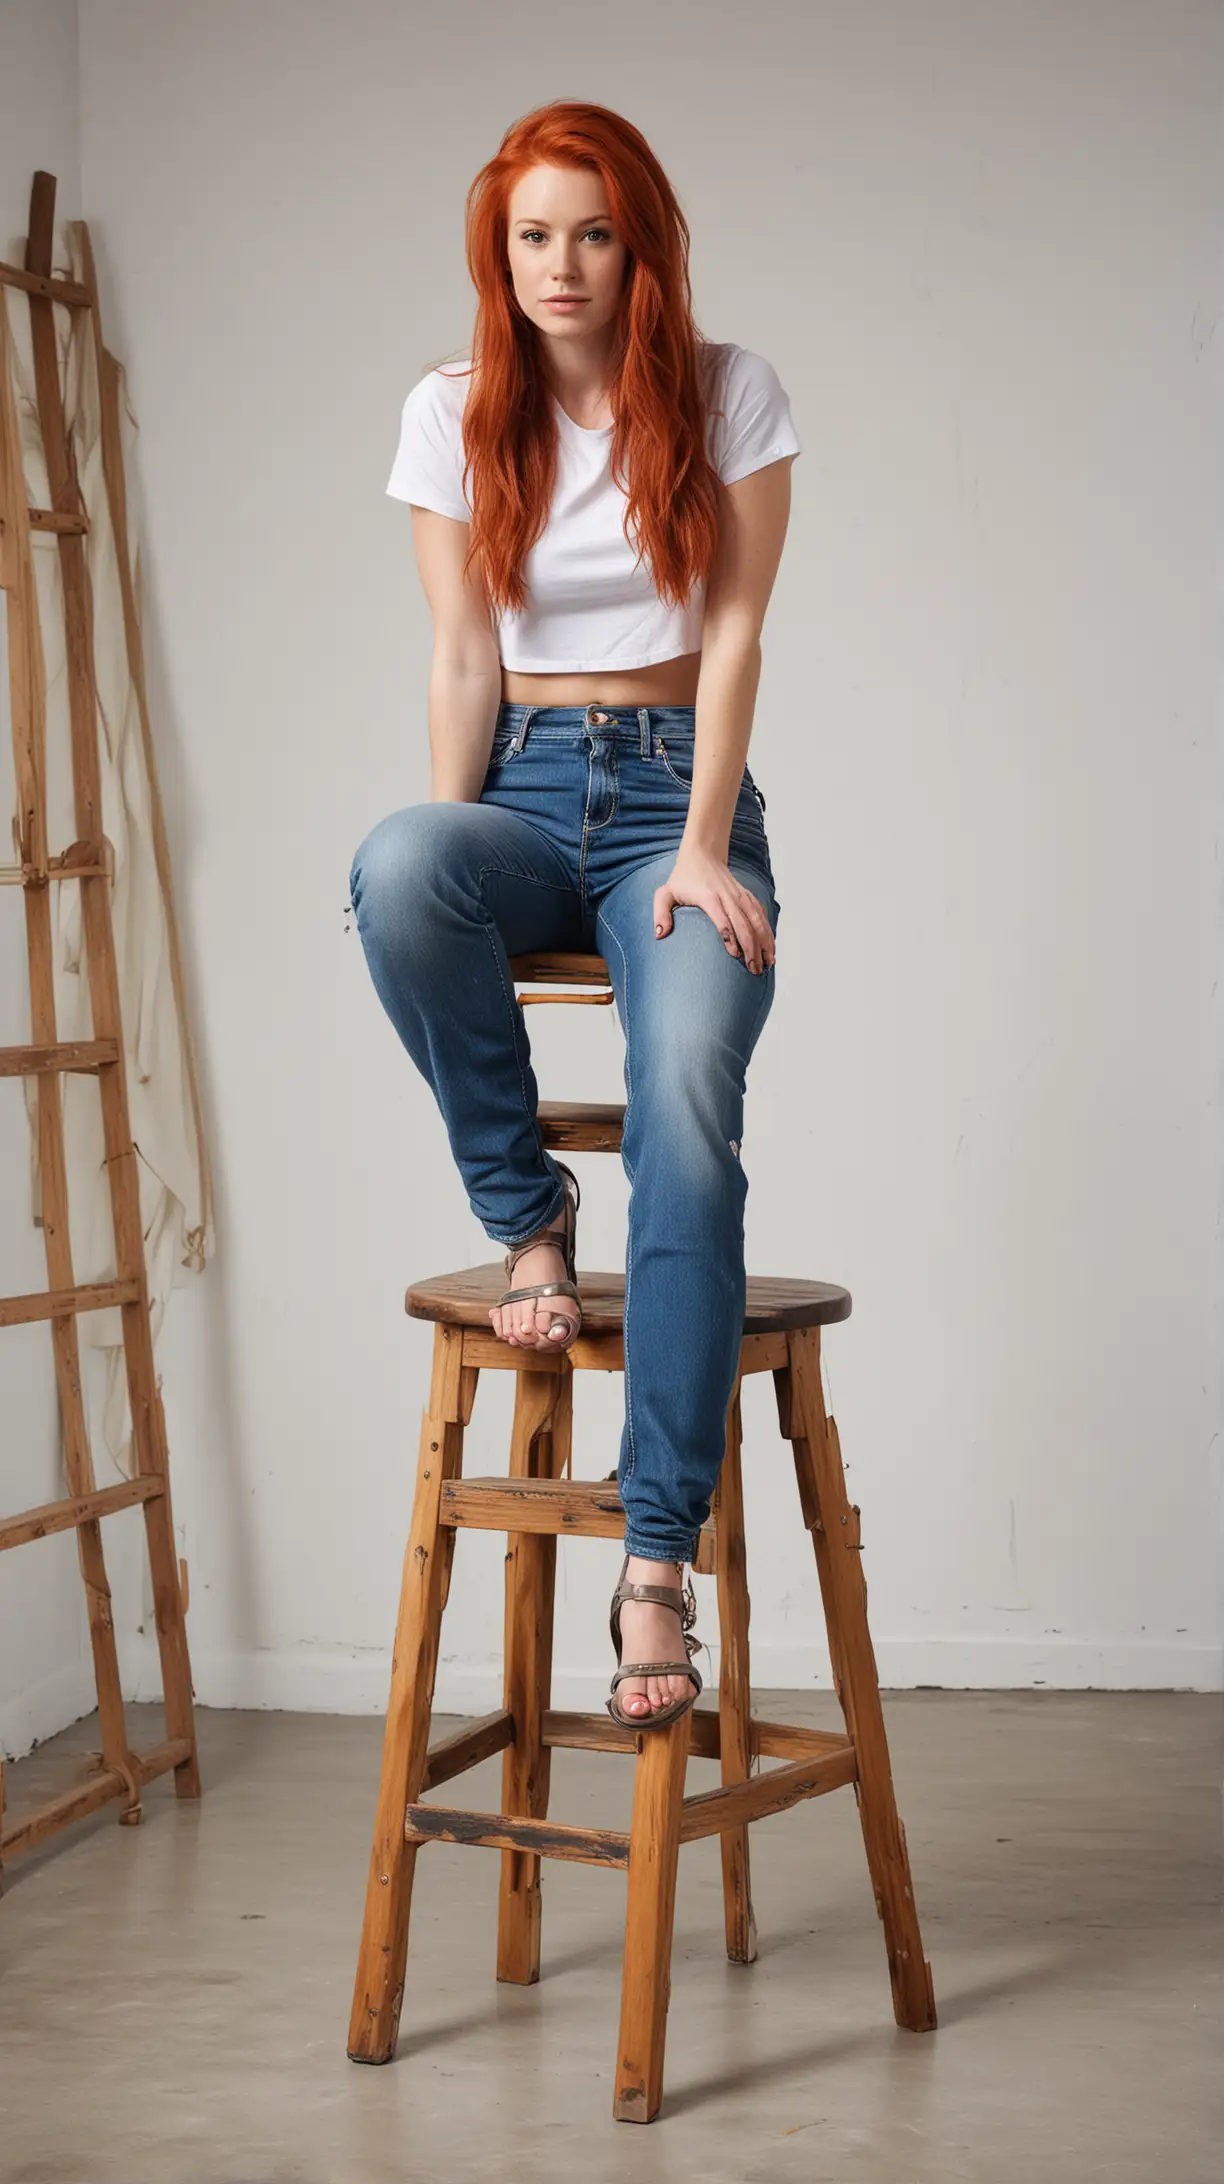 Vibrant RedHaired Woman in Artistic Loft Studio